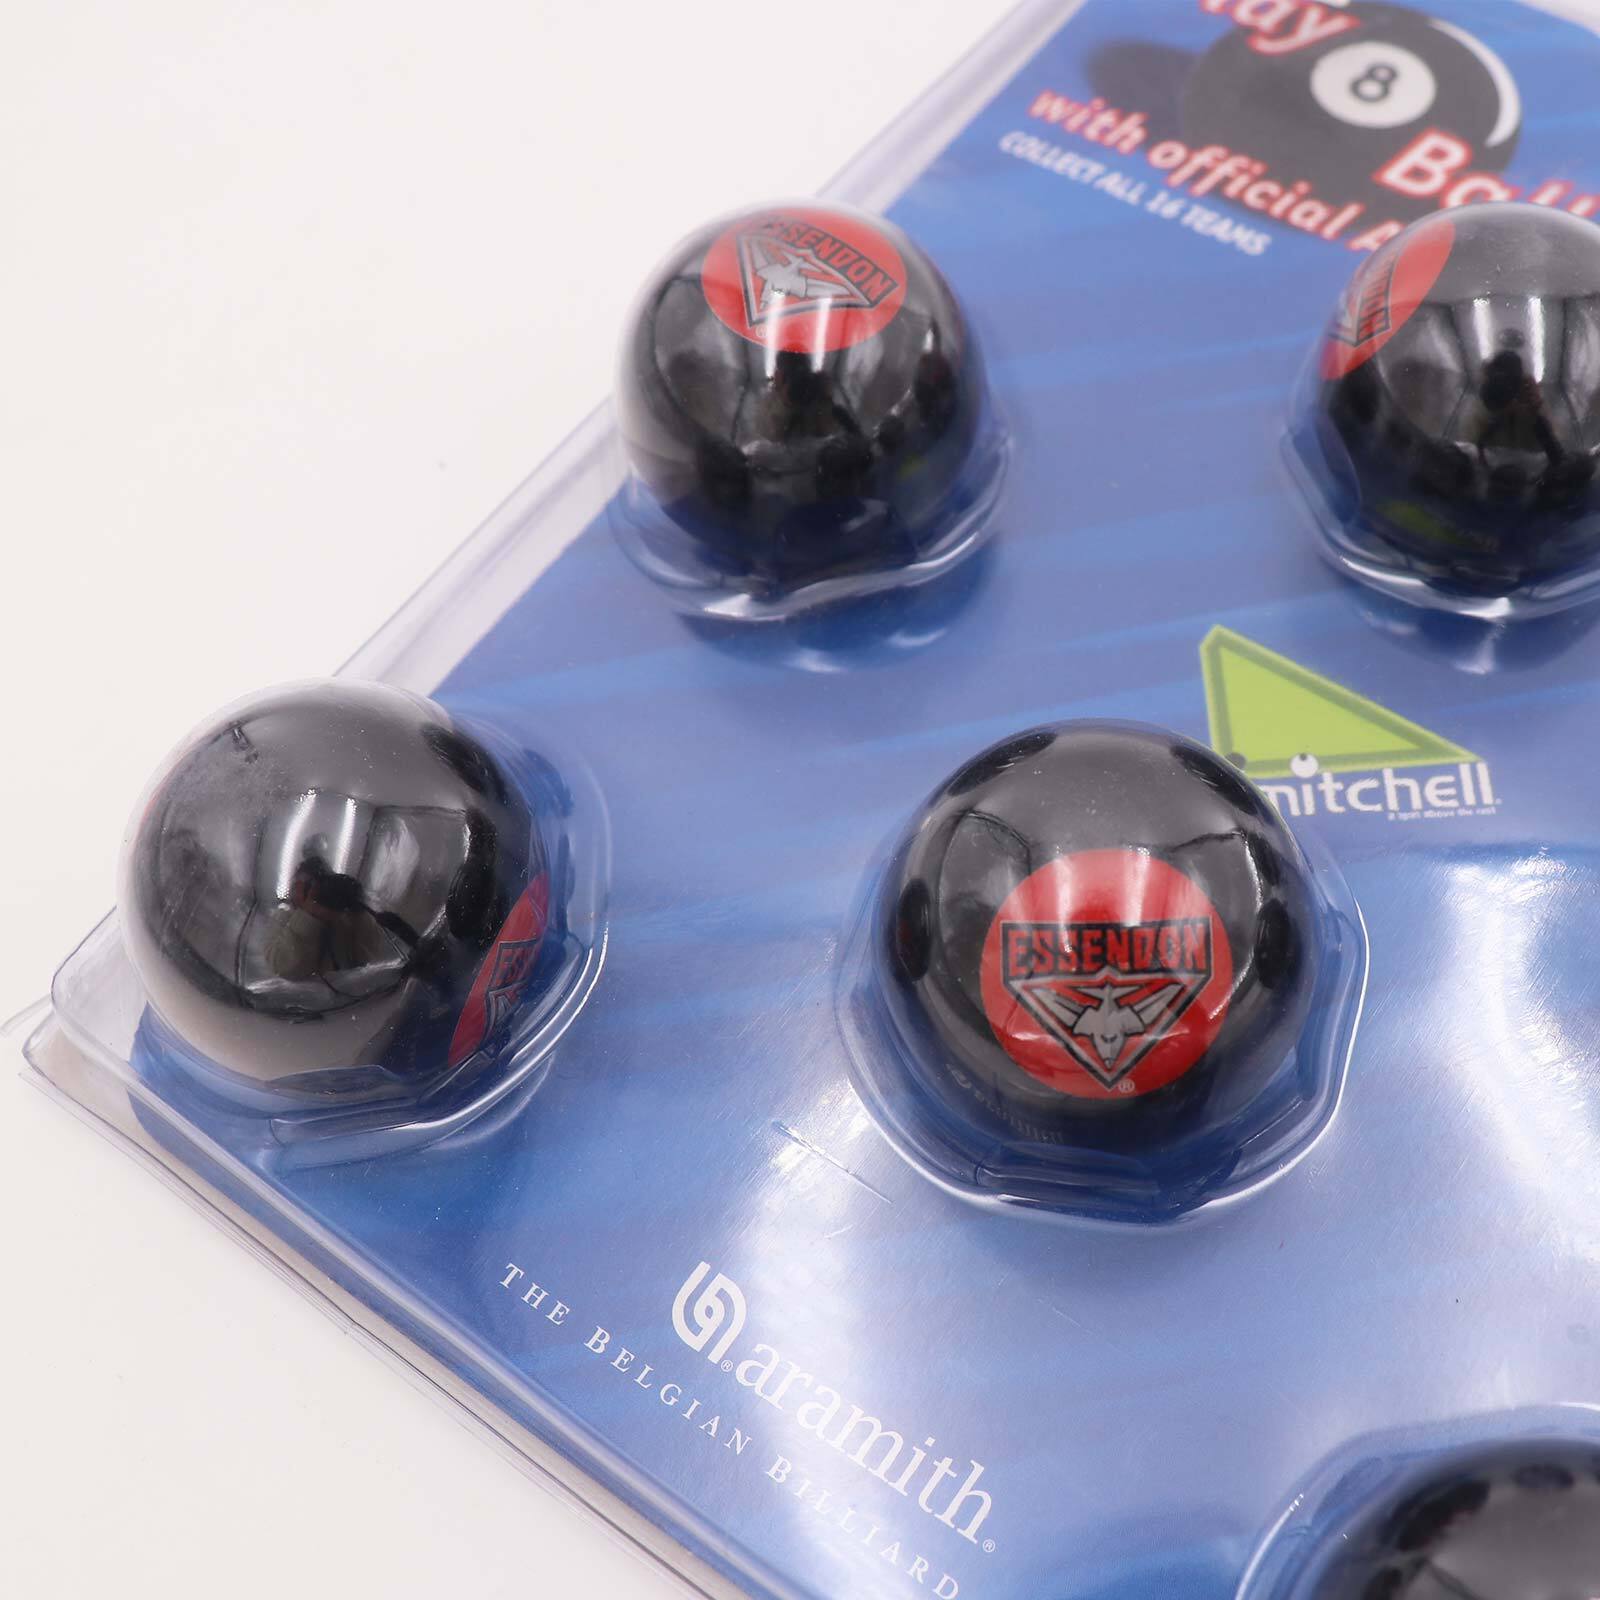 Aramith Pool Snooker Billiards Balls with official AFL Team logos - Essendon